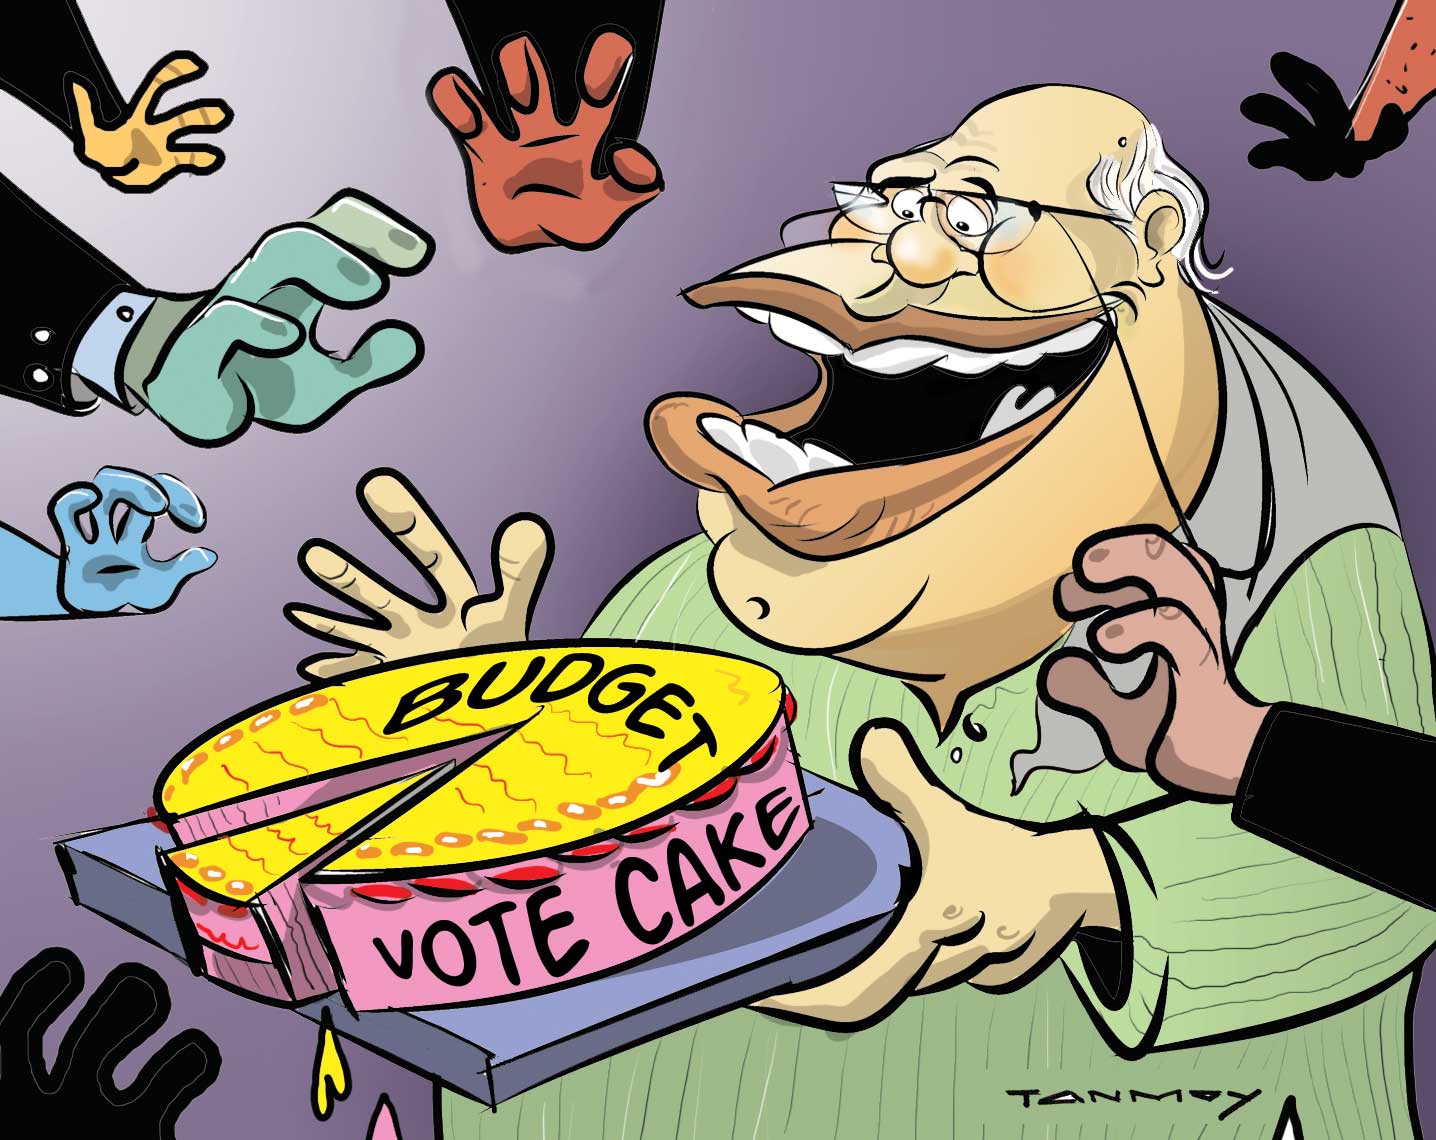 Tanmoy Cartoons: BUDGET FOR ELECTION BUDGET FOR VOTE!